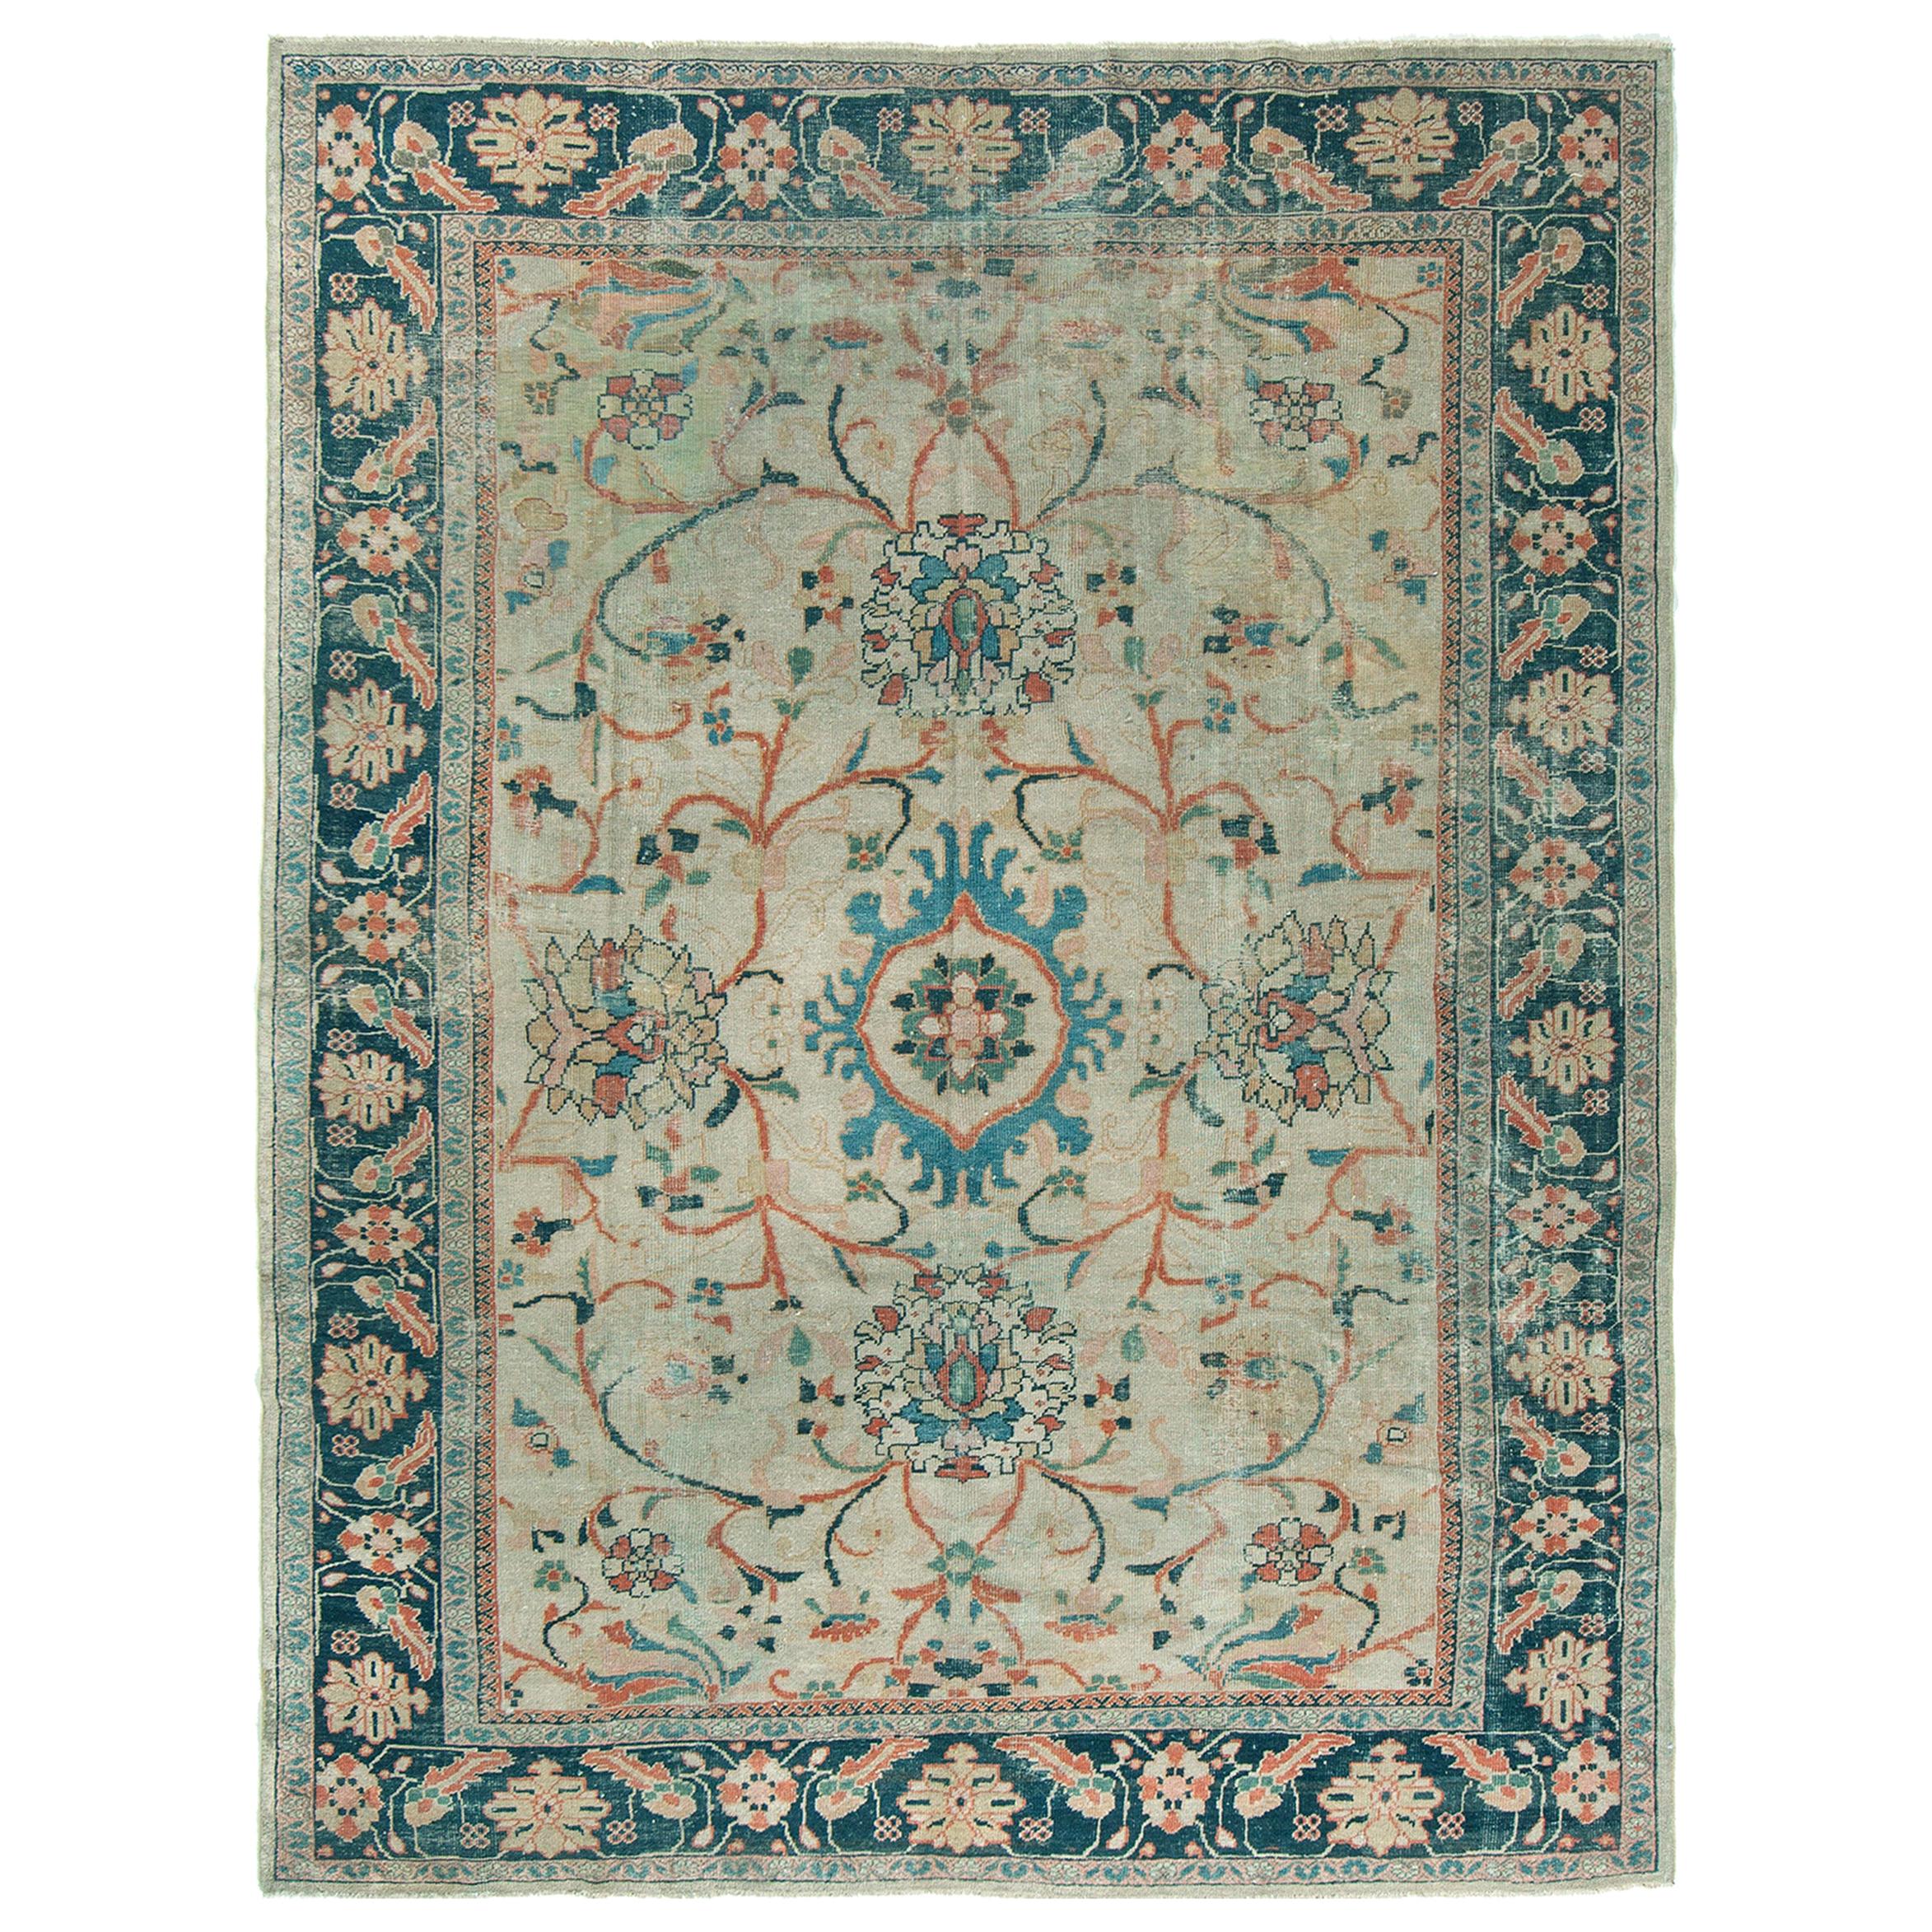 Characterized by an appealing classical composition, this antique Mahal carpet is a charming and exciting example. A series of ornate borders frames the piece, with floral patterns being dominant. Within the field, an elegant and classical all-over